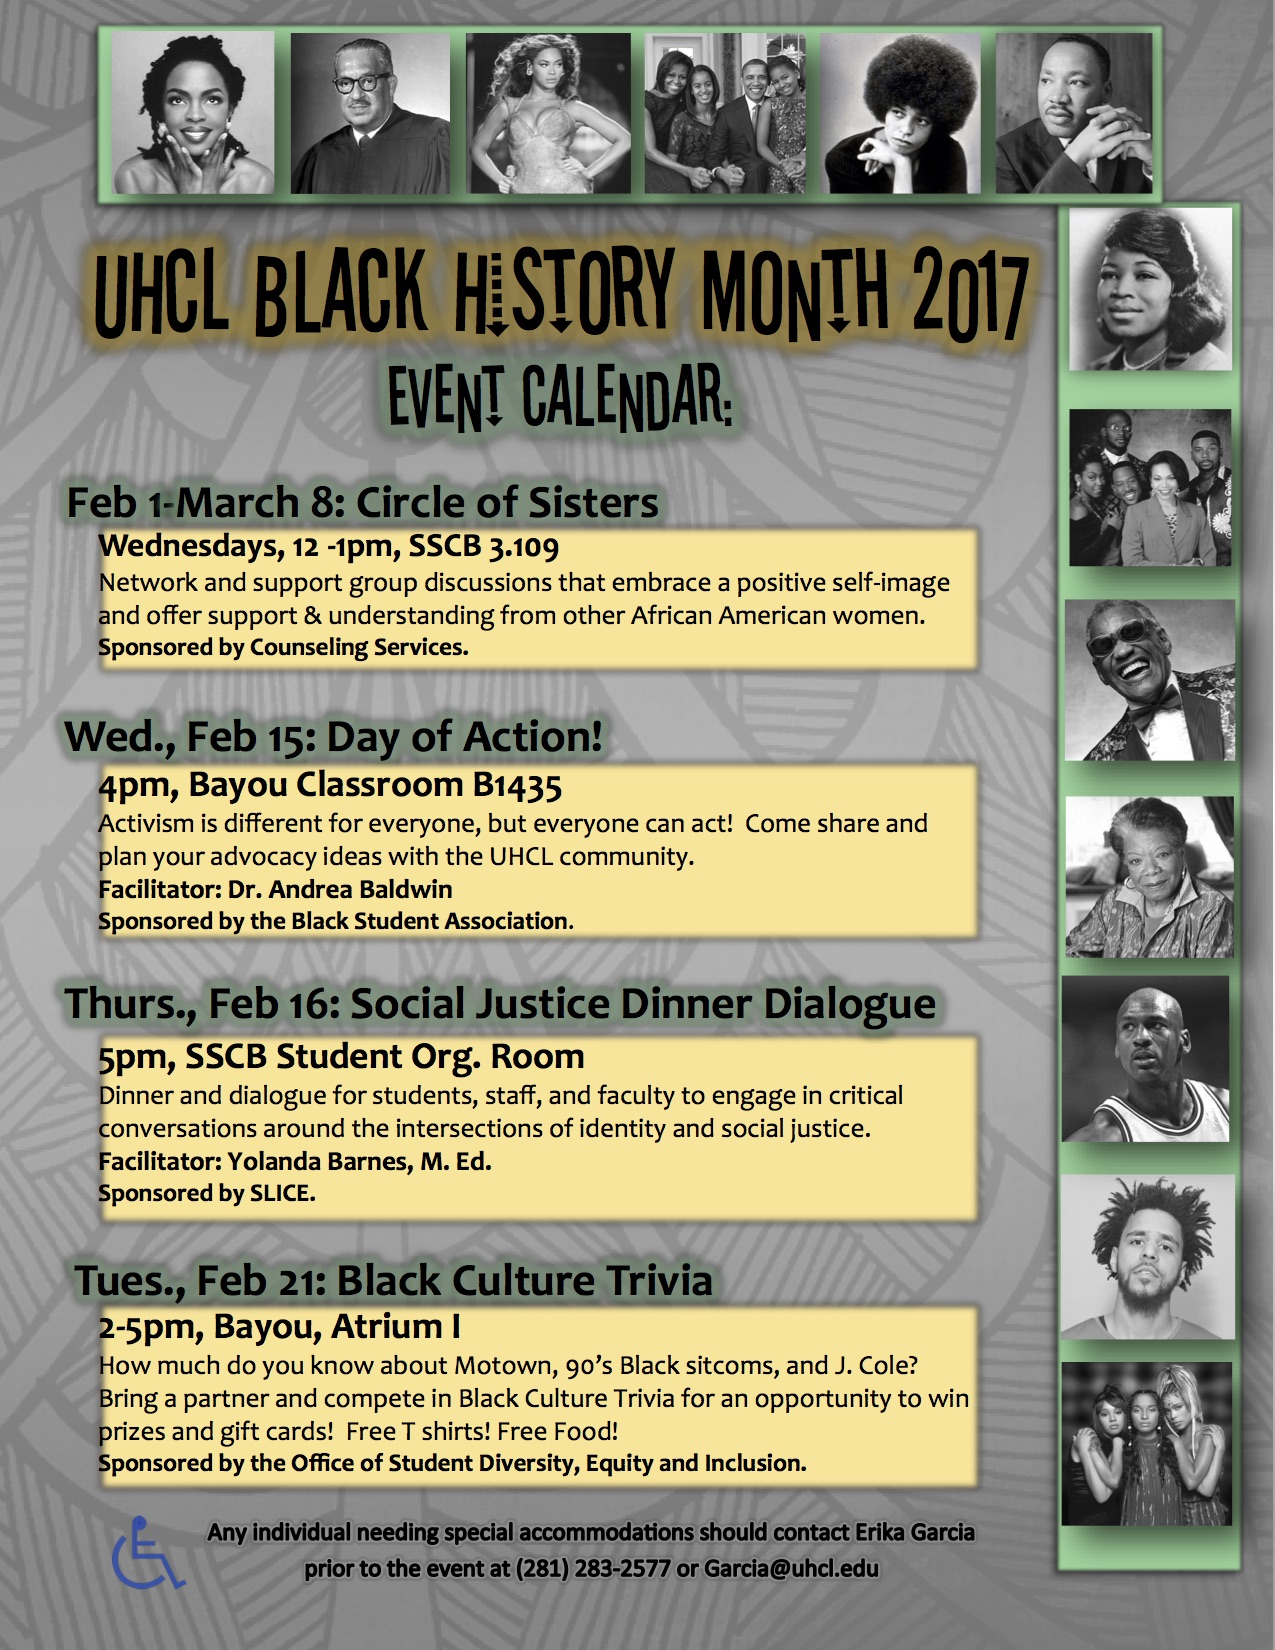 Black History Month calendar of events flyer. Photo courtesy of the Office of Student Diversity, Equity and Inclusion.